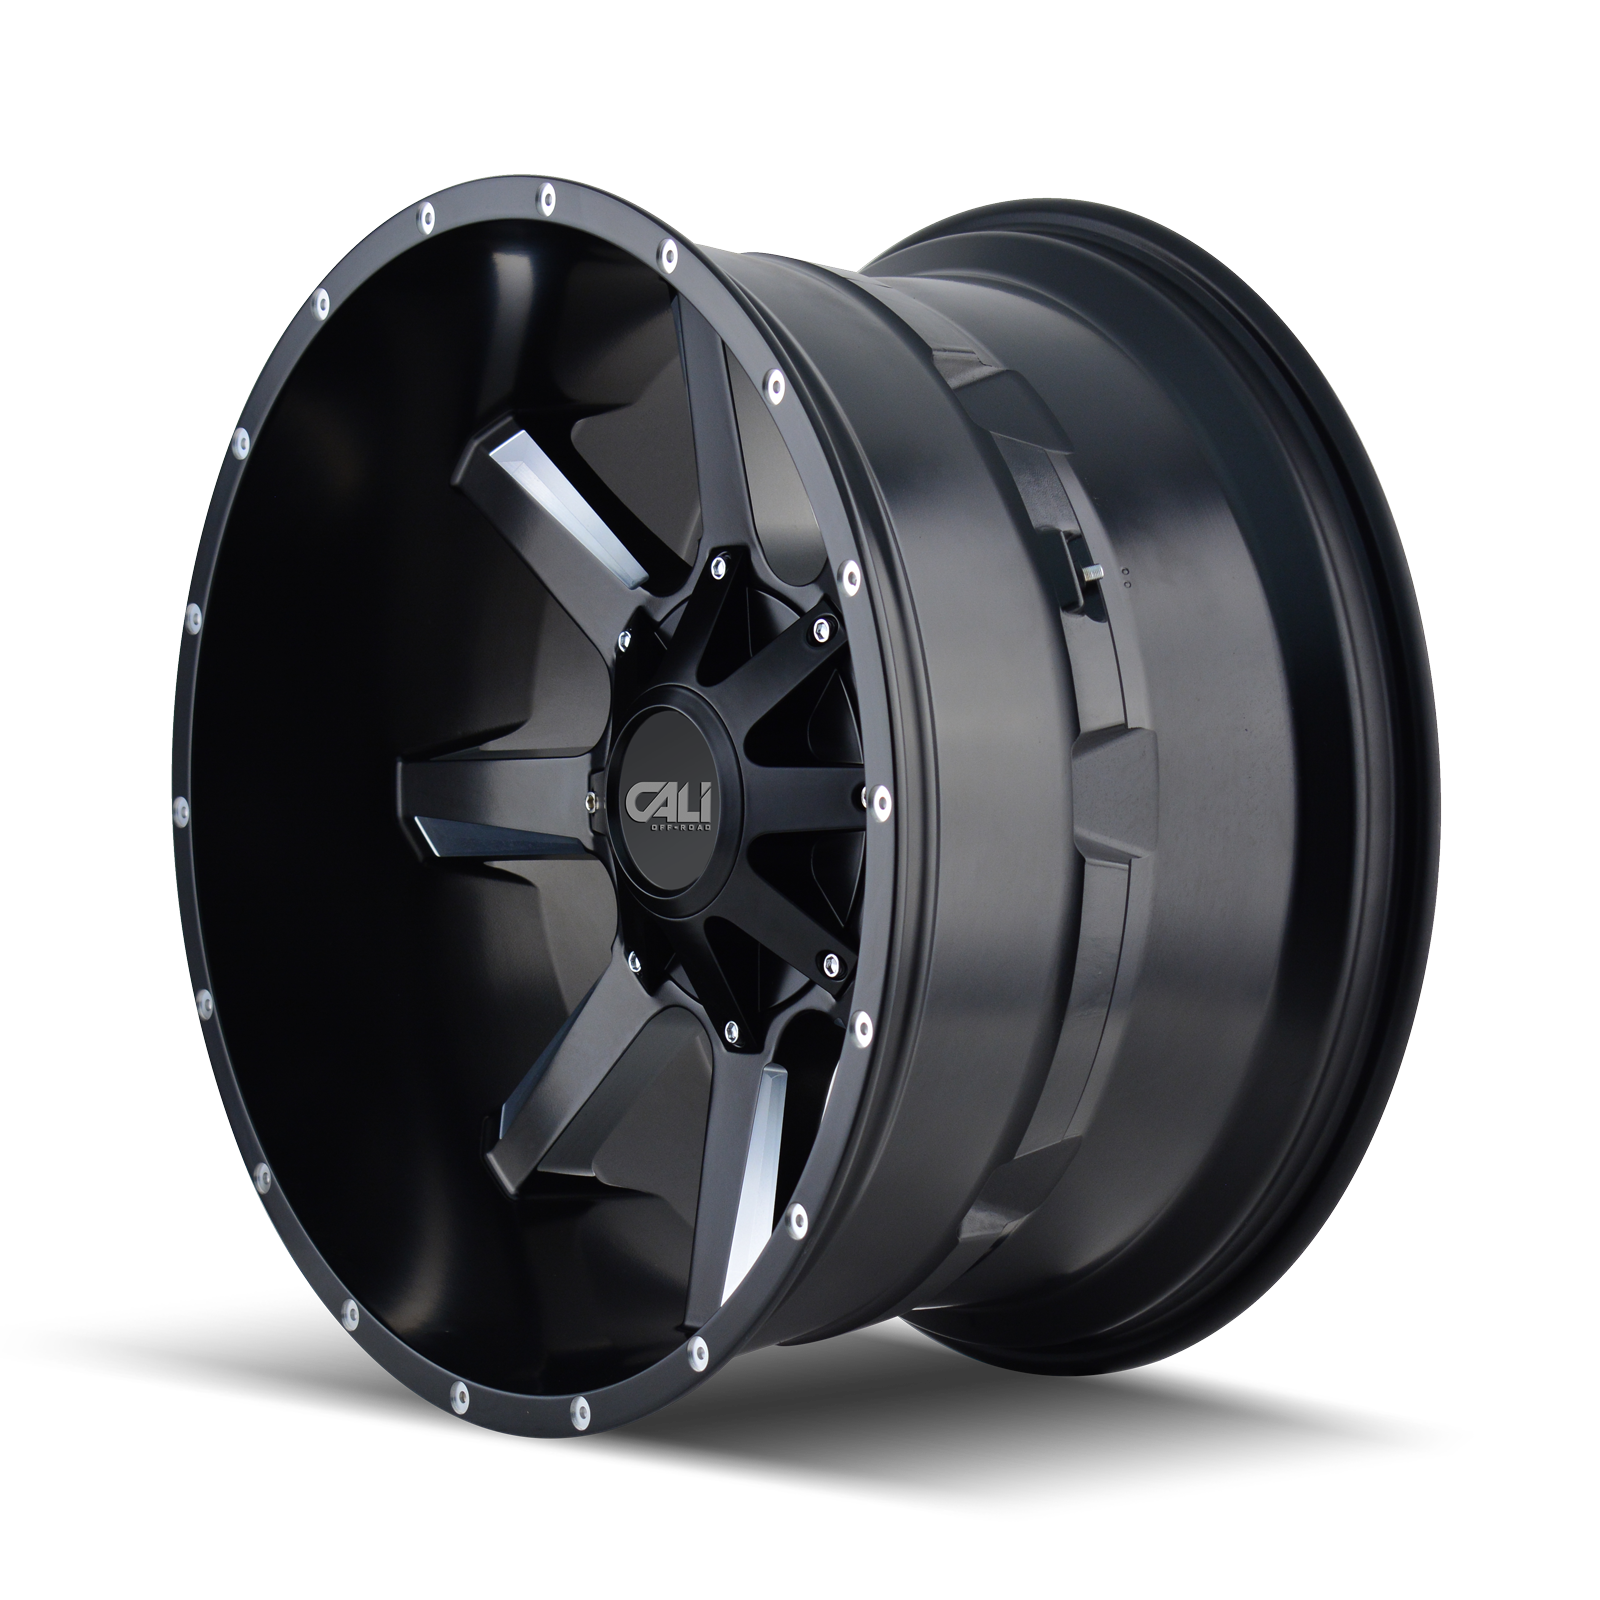 Cali Off-road BUSTED Satin black milled 20x9 +18 8x180mm 124.1mm - WheelWiz